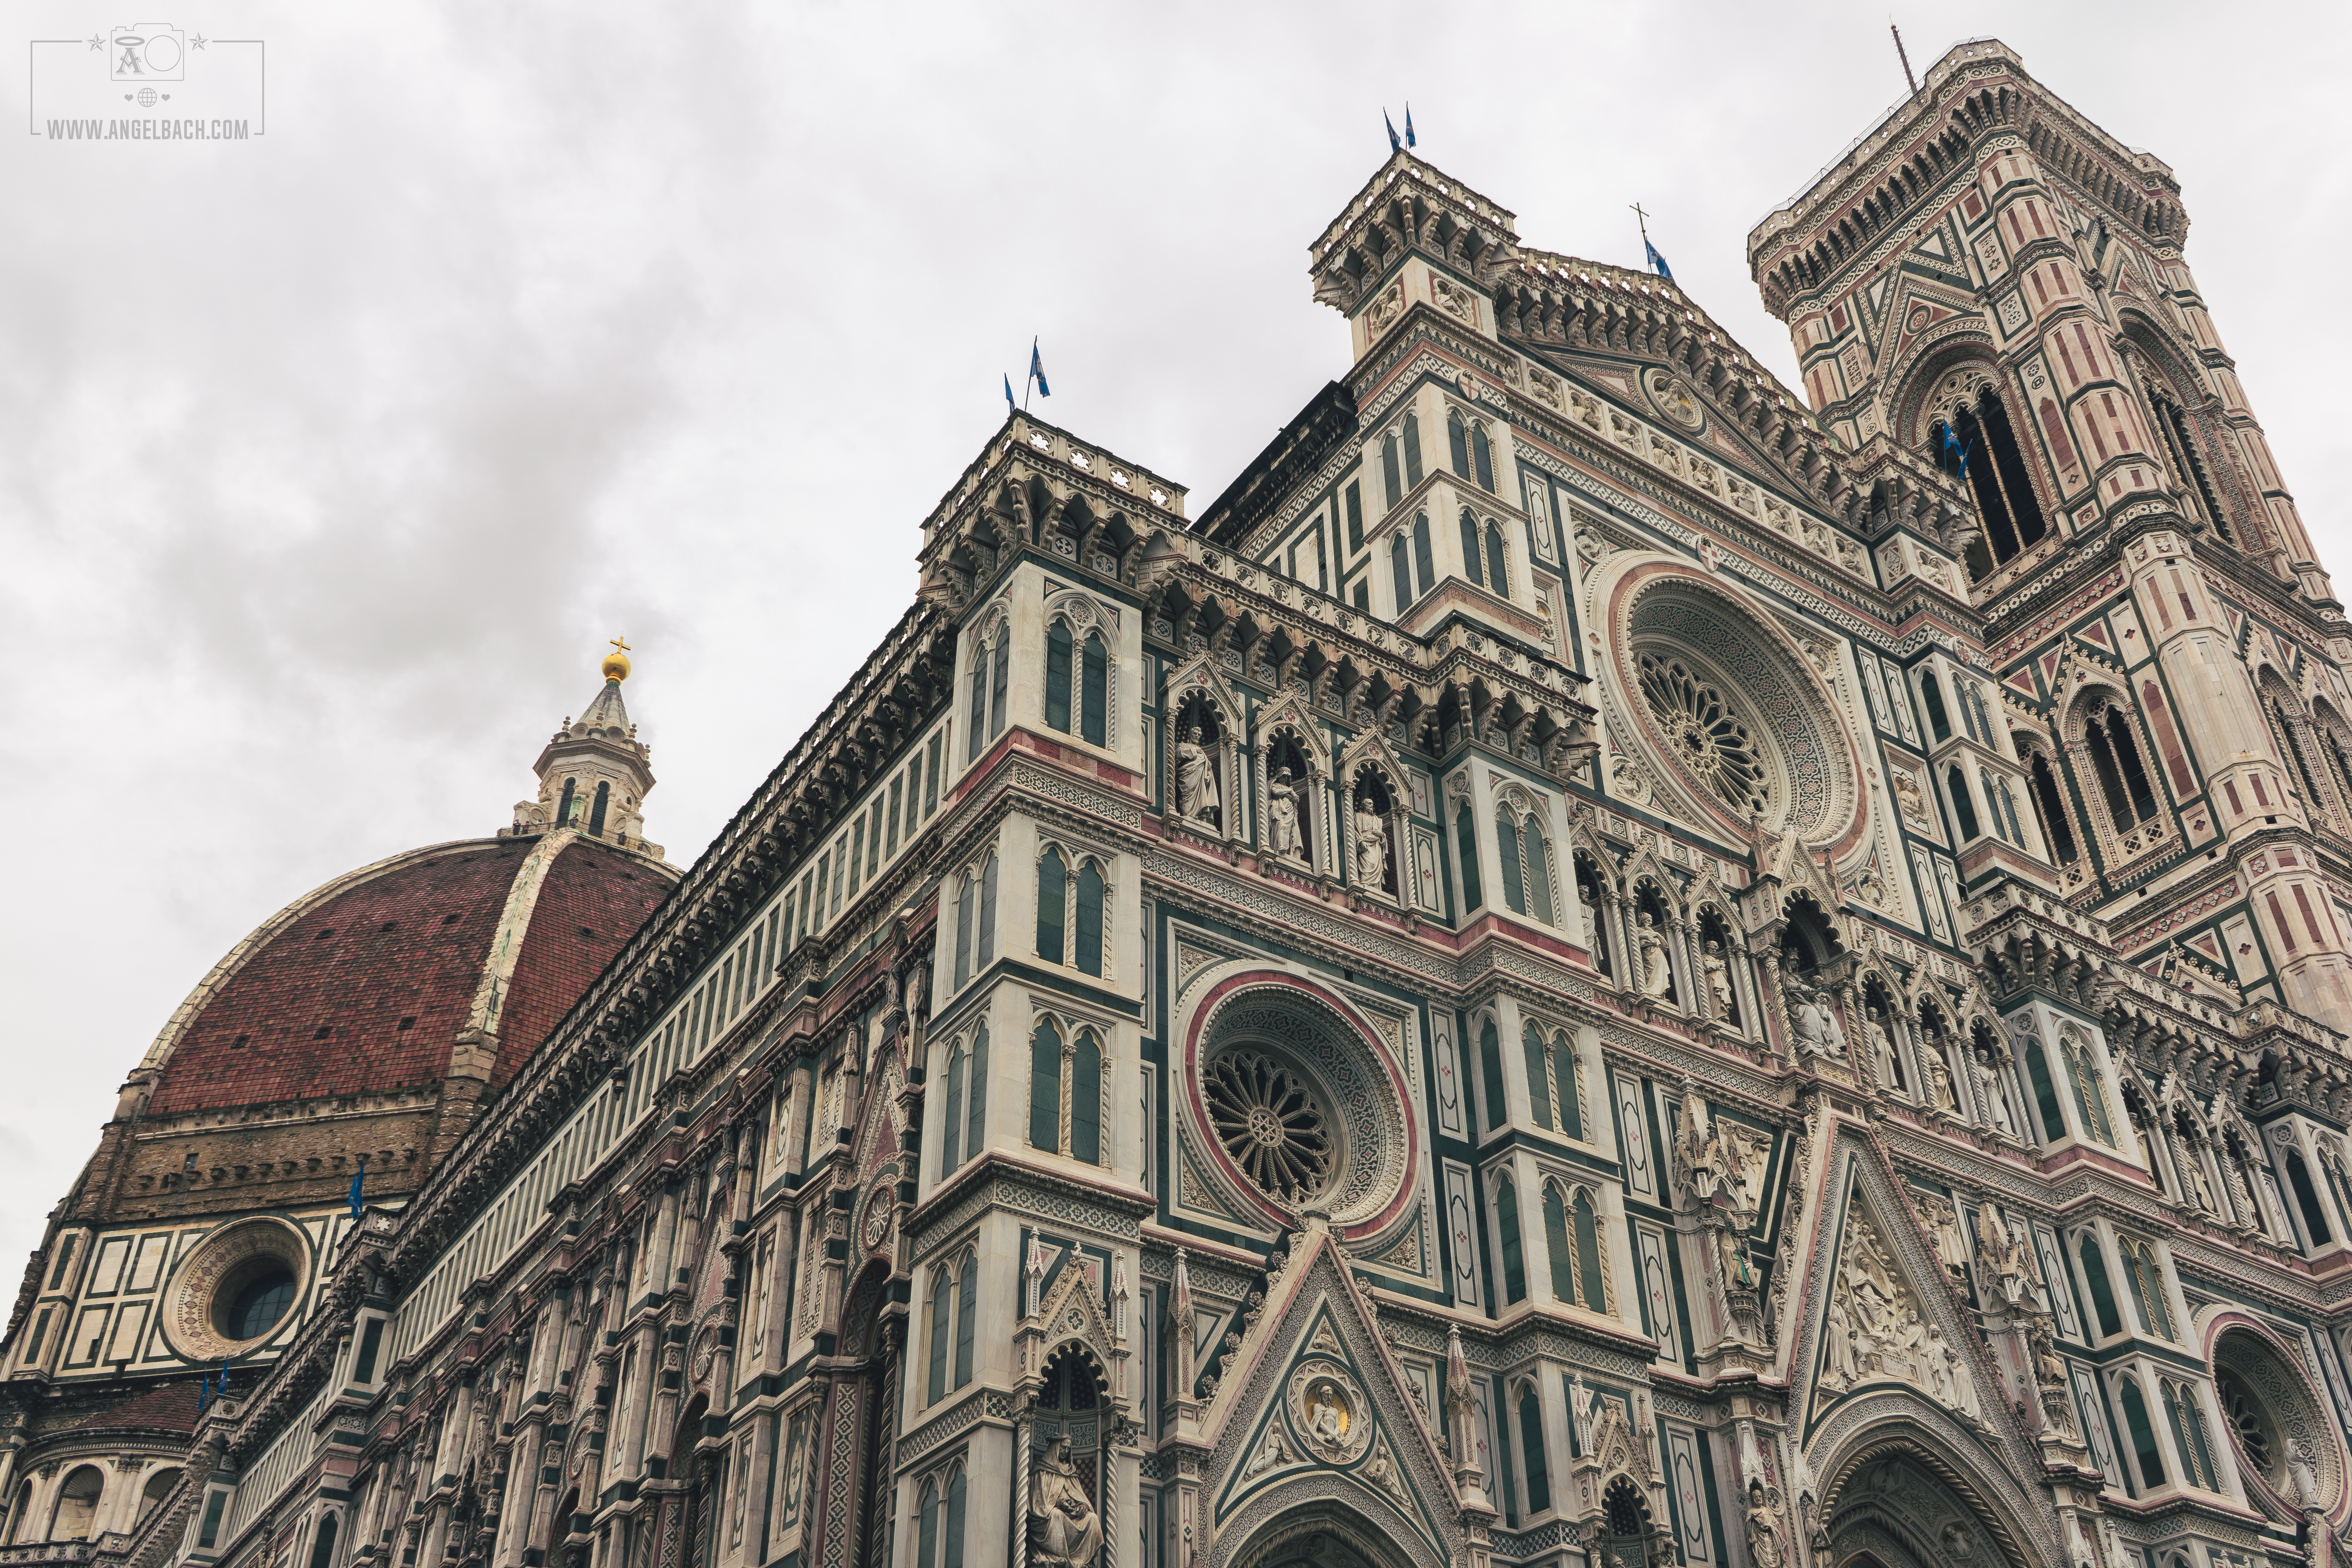 Day Photography, Cityscape, Landscape, Florence, Tourist Attraction, Ancient place, Tuscany, Italy, Florence Architecture, Church Duomo